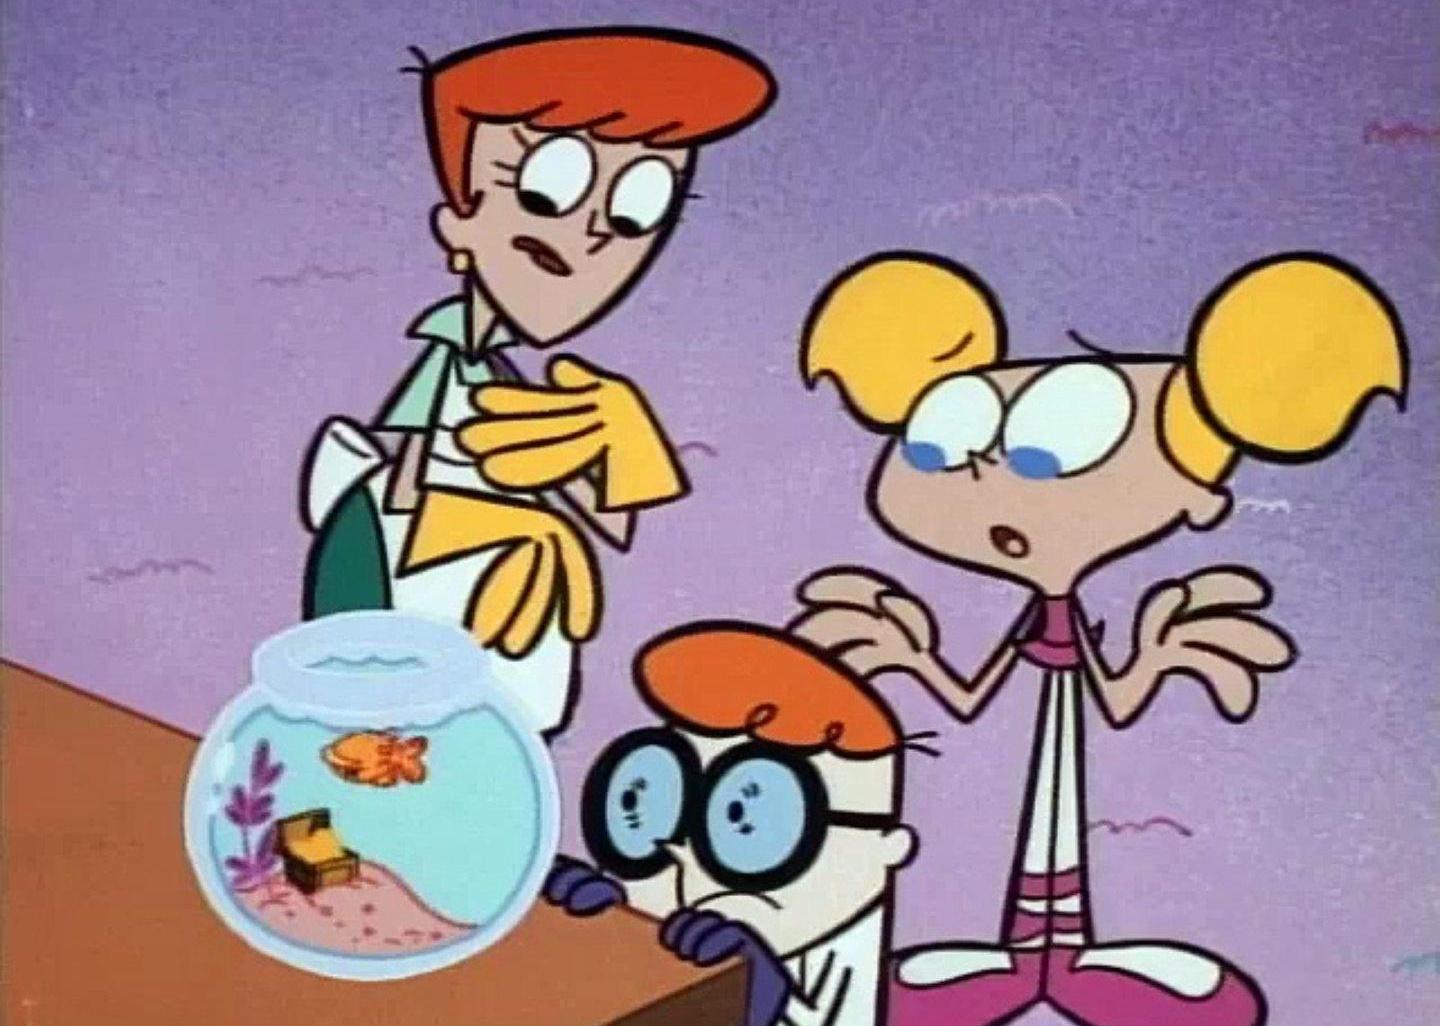 An animated still from ‘Dexter's Laboratory’.